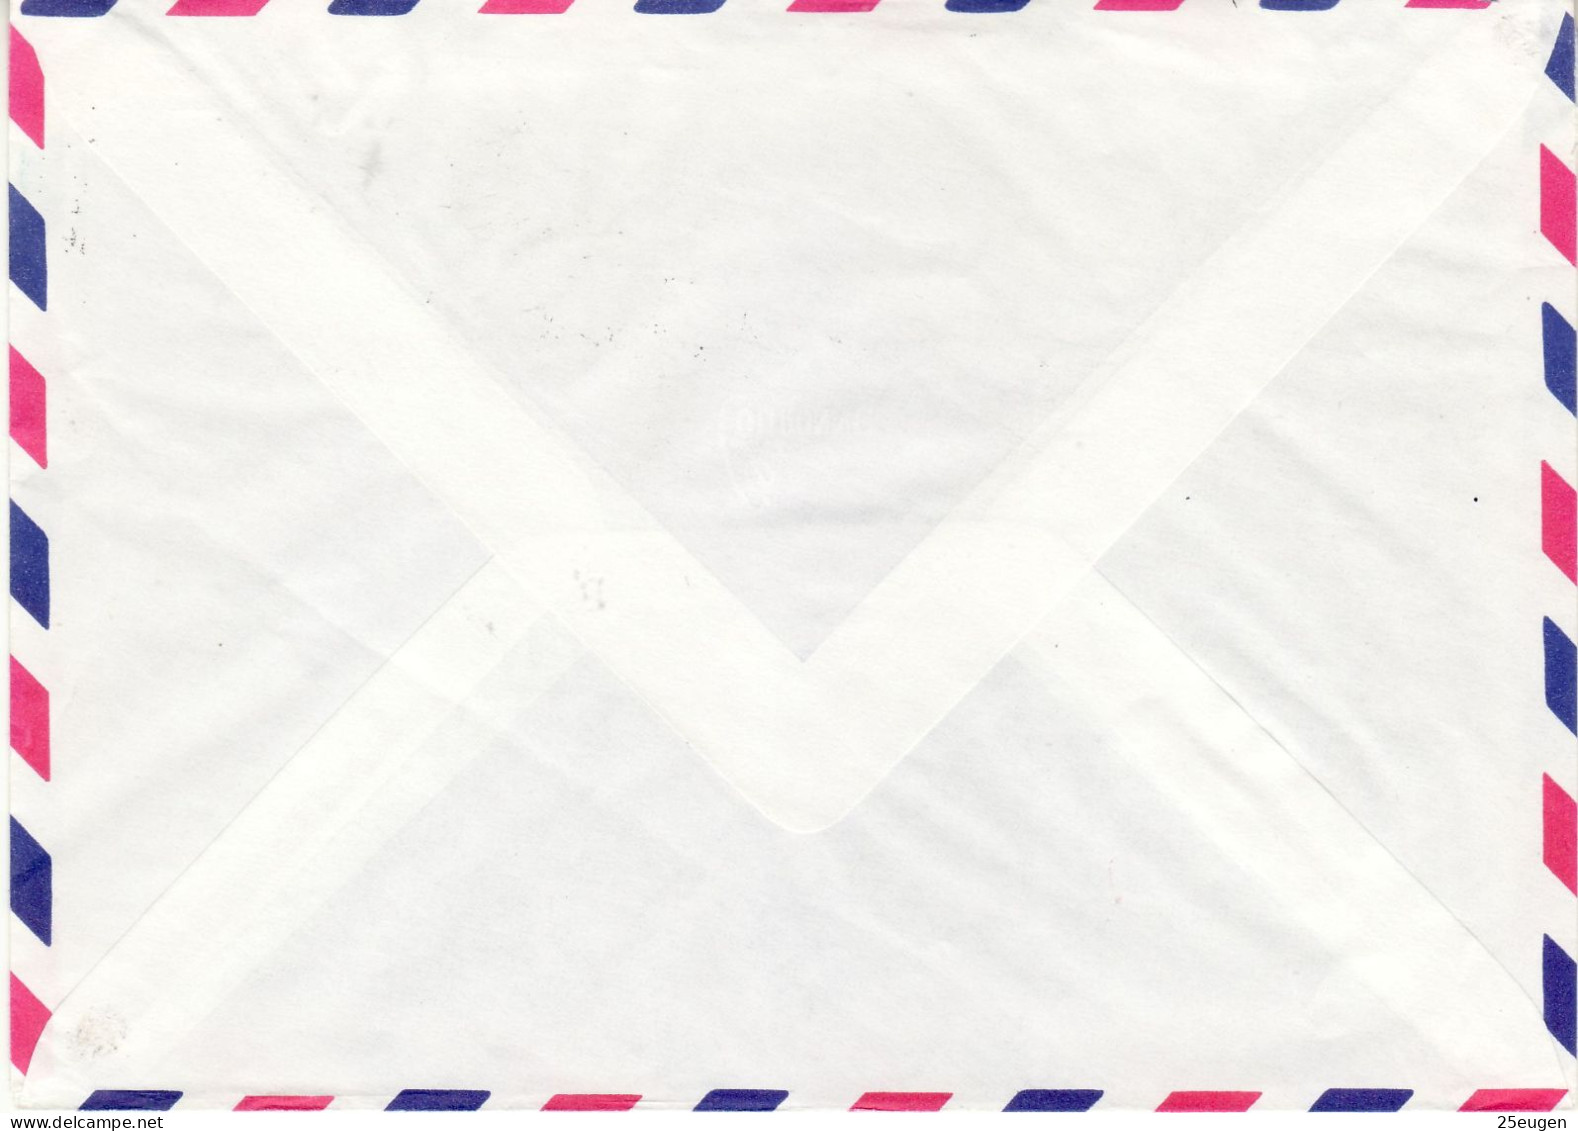 NEW CALEDONIA 1986 AIRMAIL LETTER SENT FROM NOUMEA TO TOULON - Covers & Documents